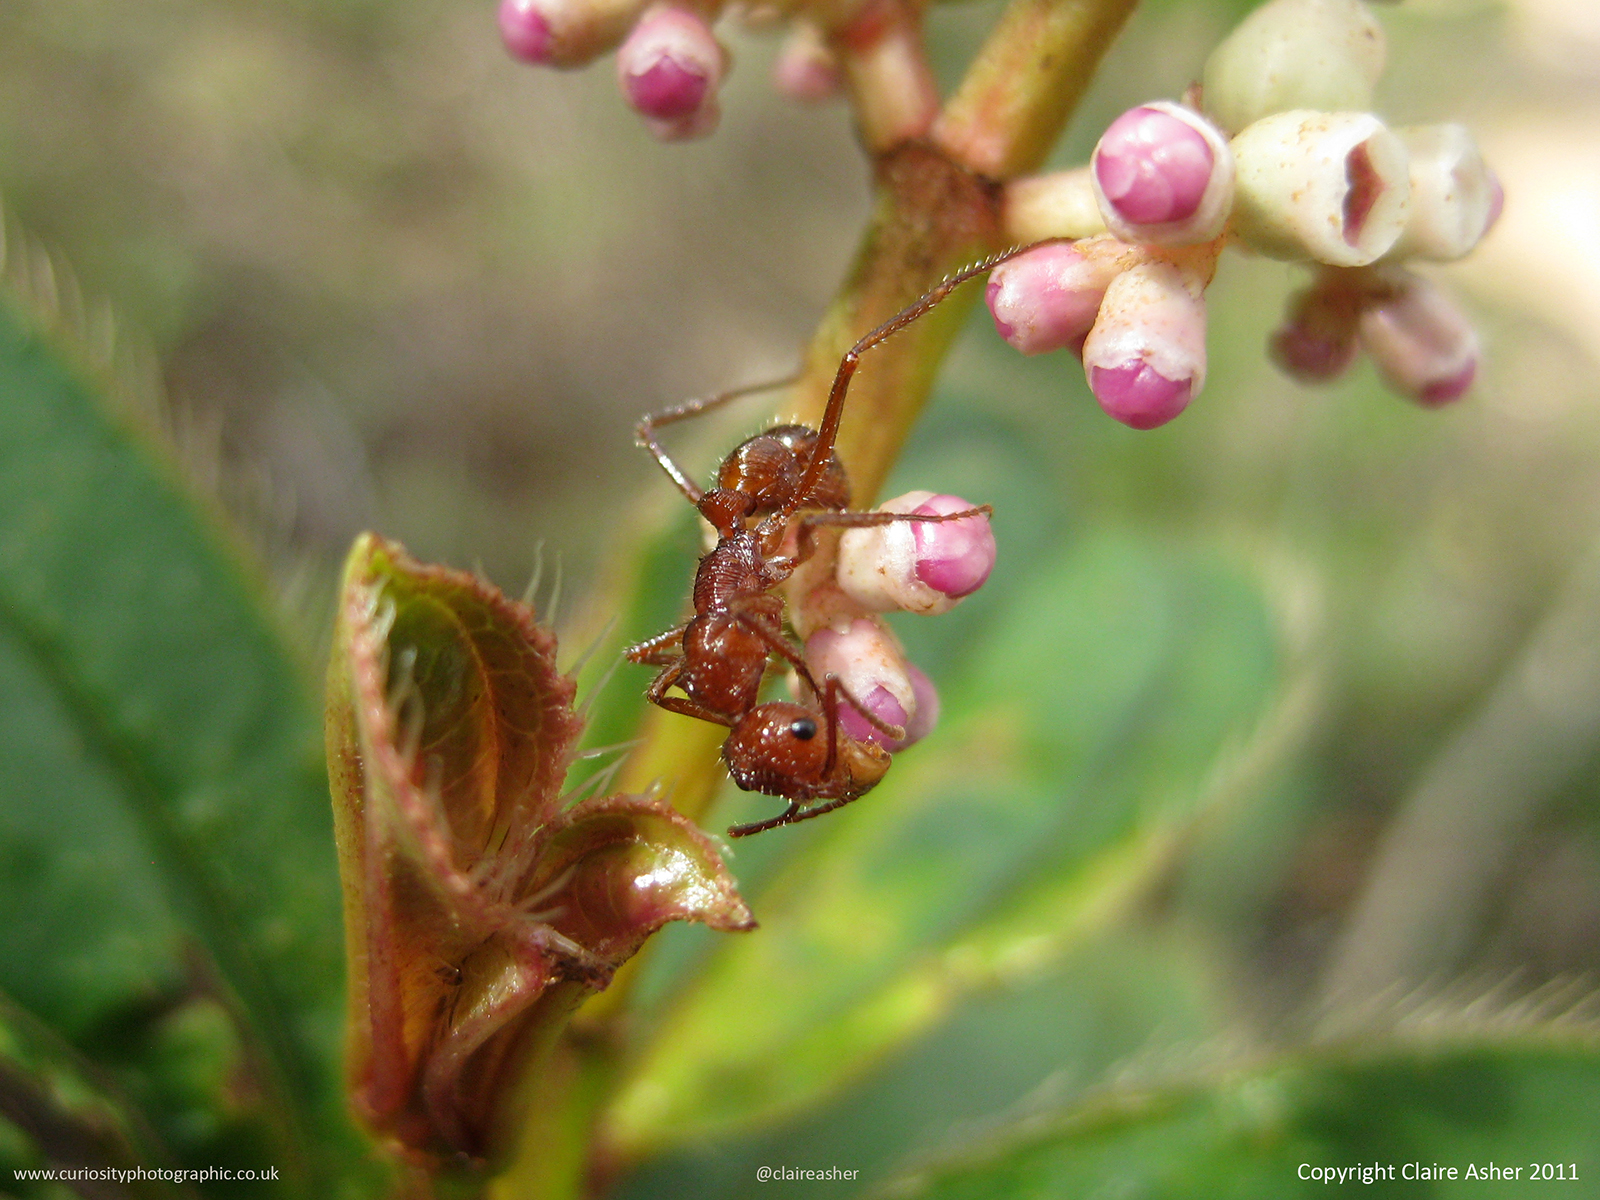 An Ant photographed in Brazil in 2011